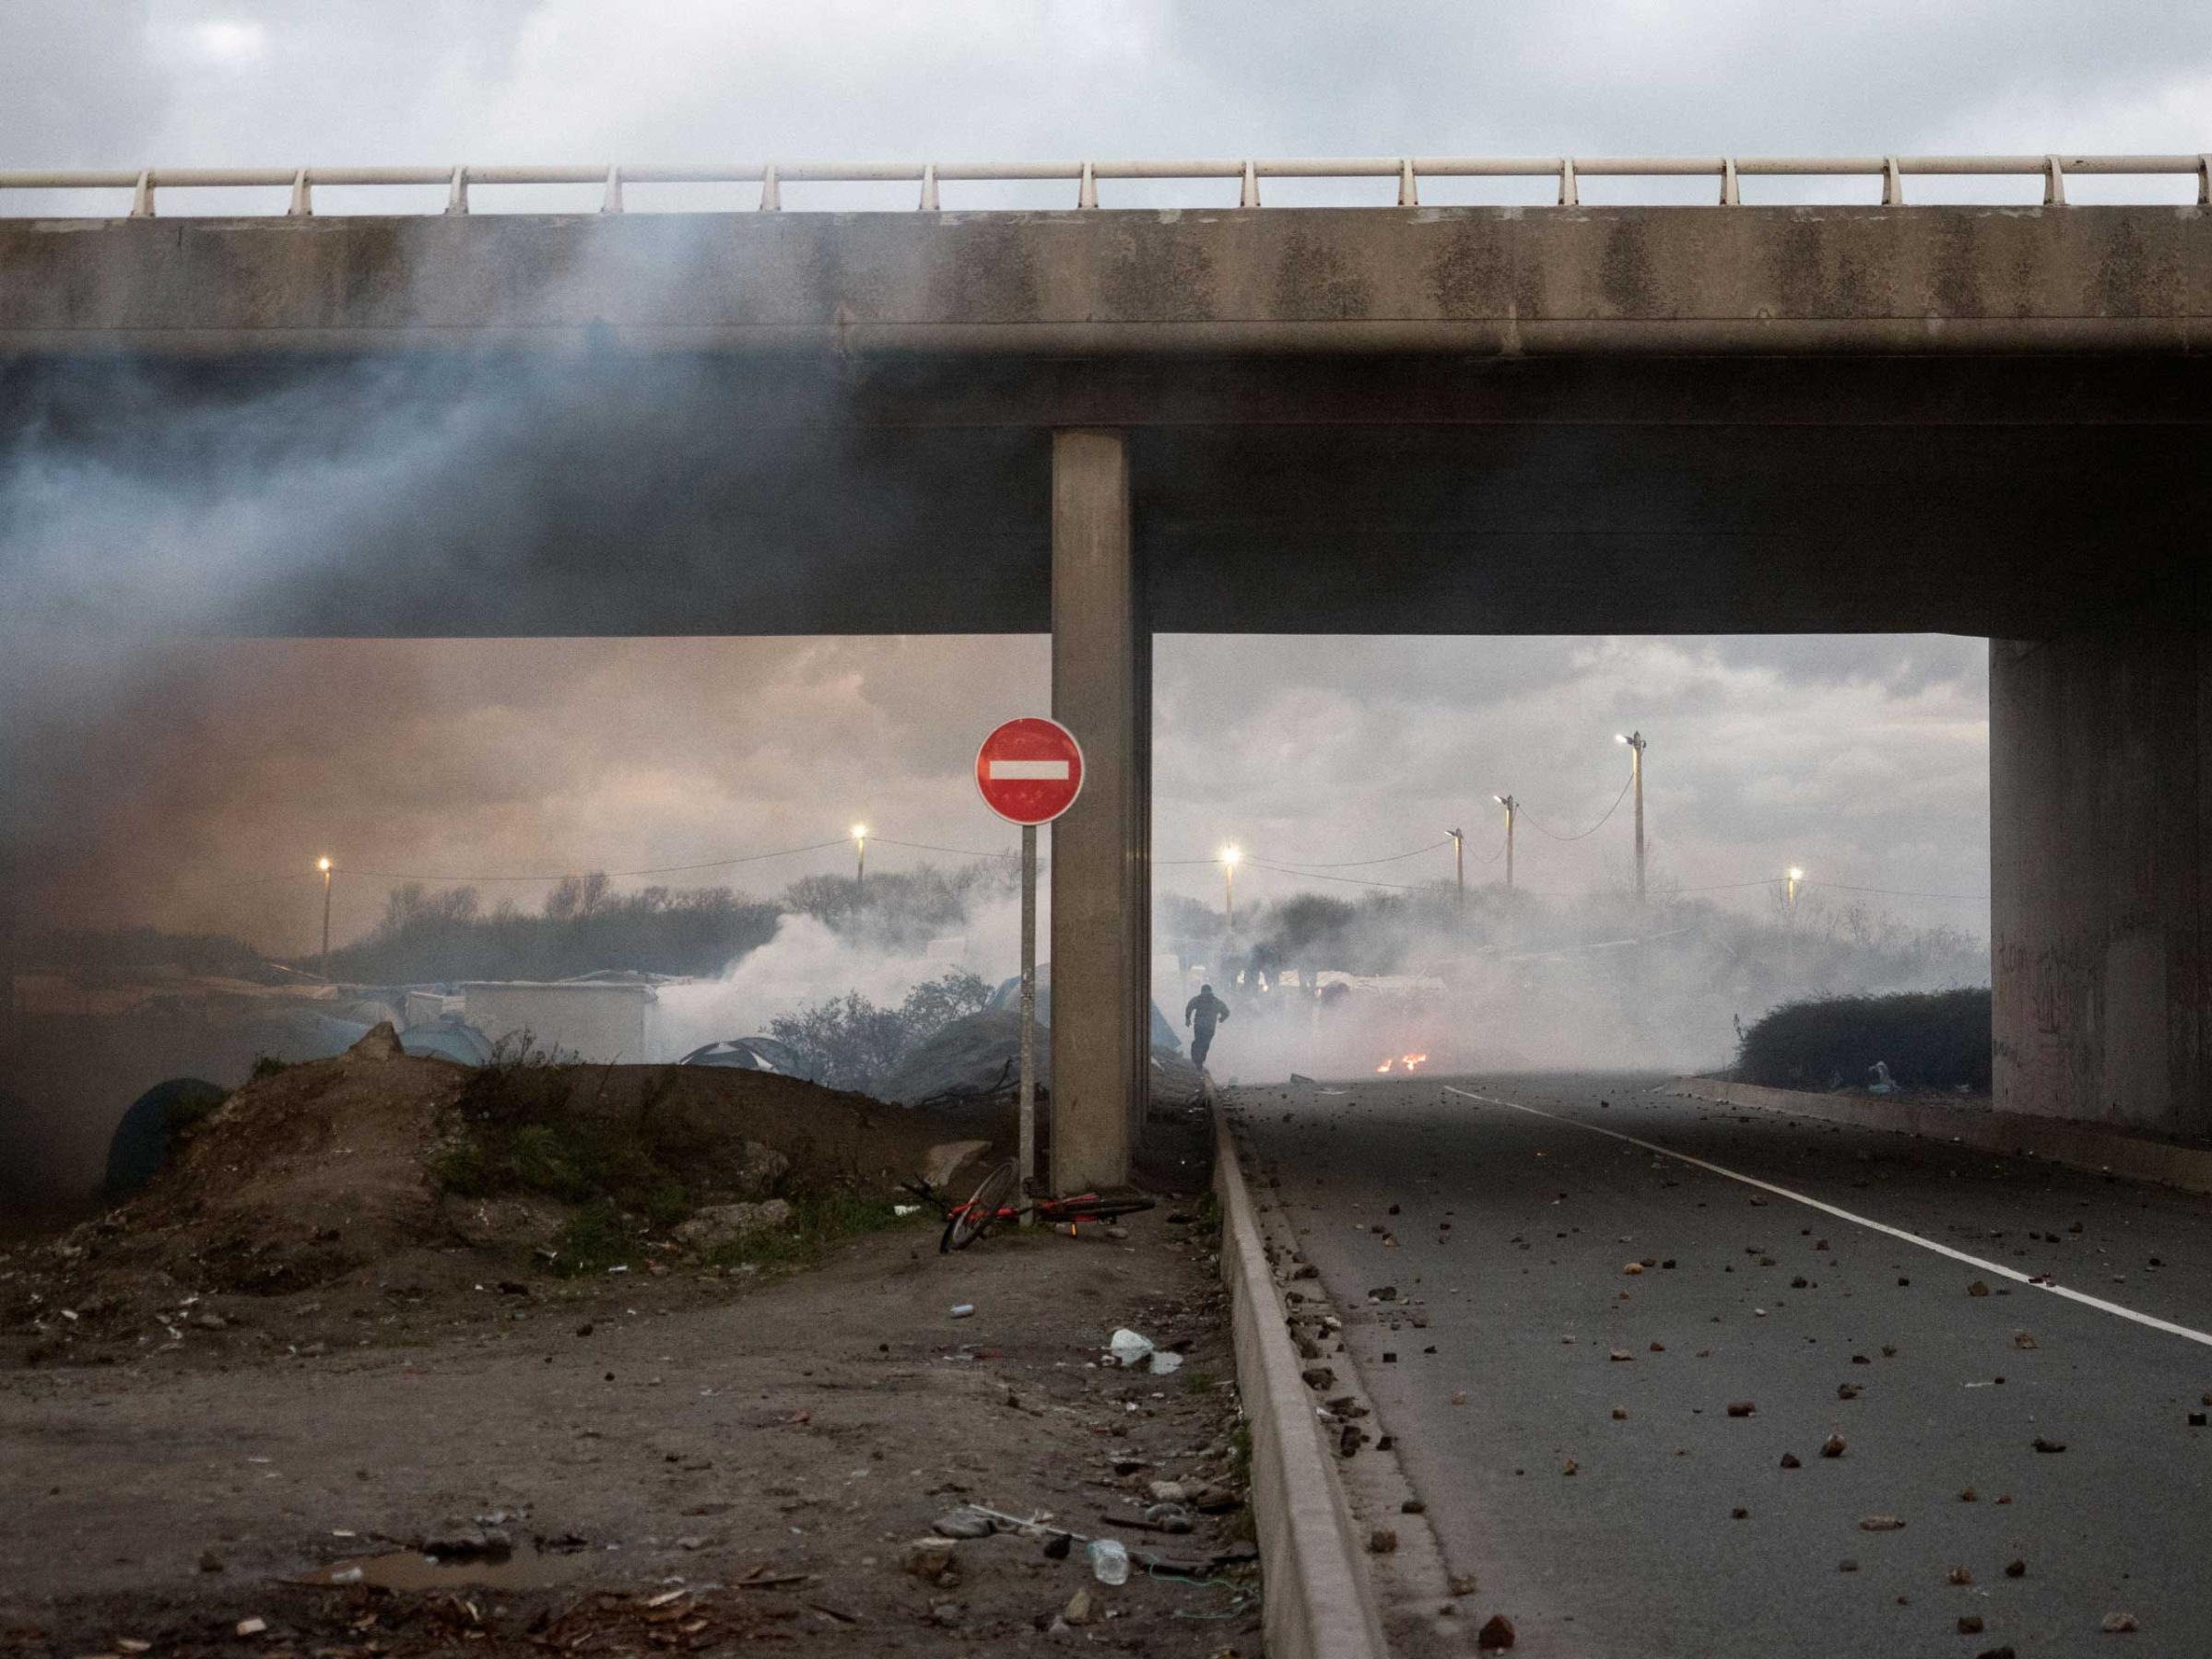 A clash between migrants and police in Calais, France, Nov. 25, 2015, where a mix of refugees, asylum seekers and economic migrants from Darfur, Afghanistan, Syria, Iraq, and Eritrea live in the shantytown known as the Òjungle."